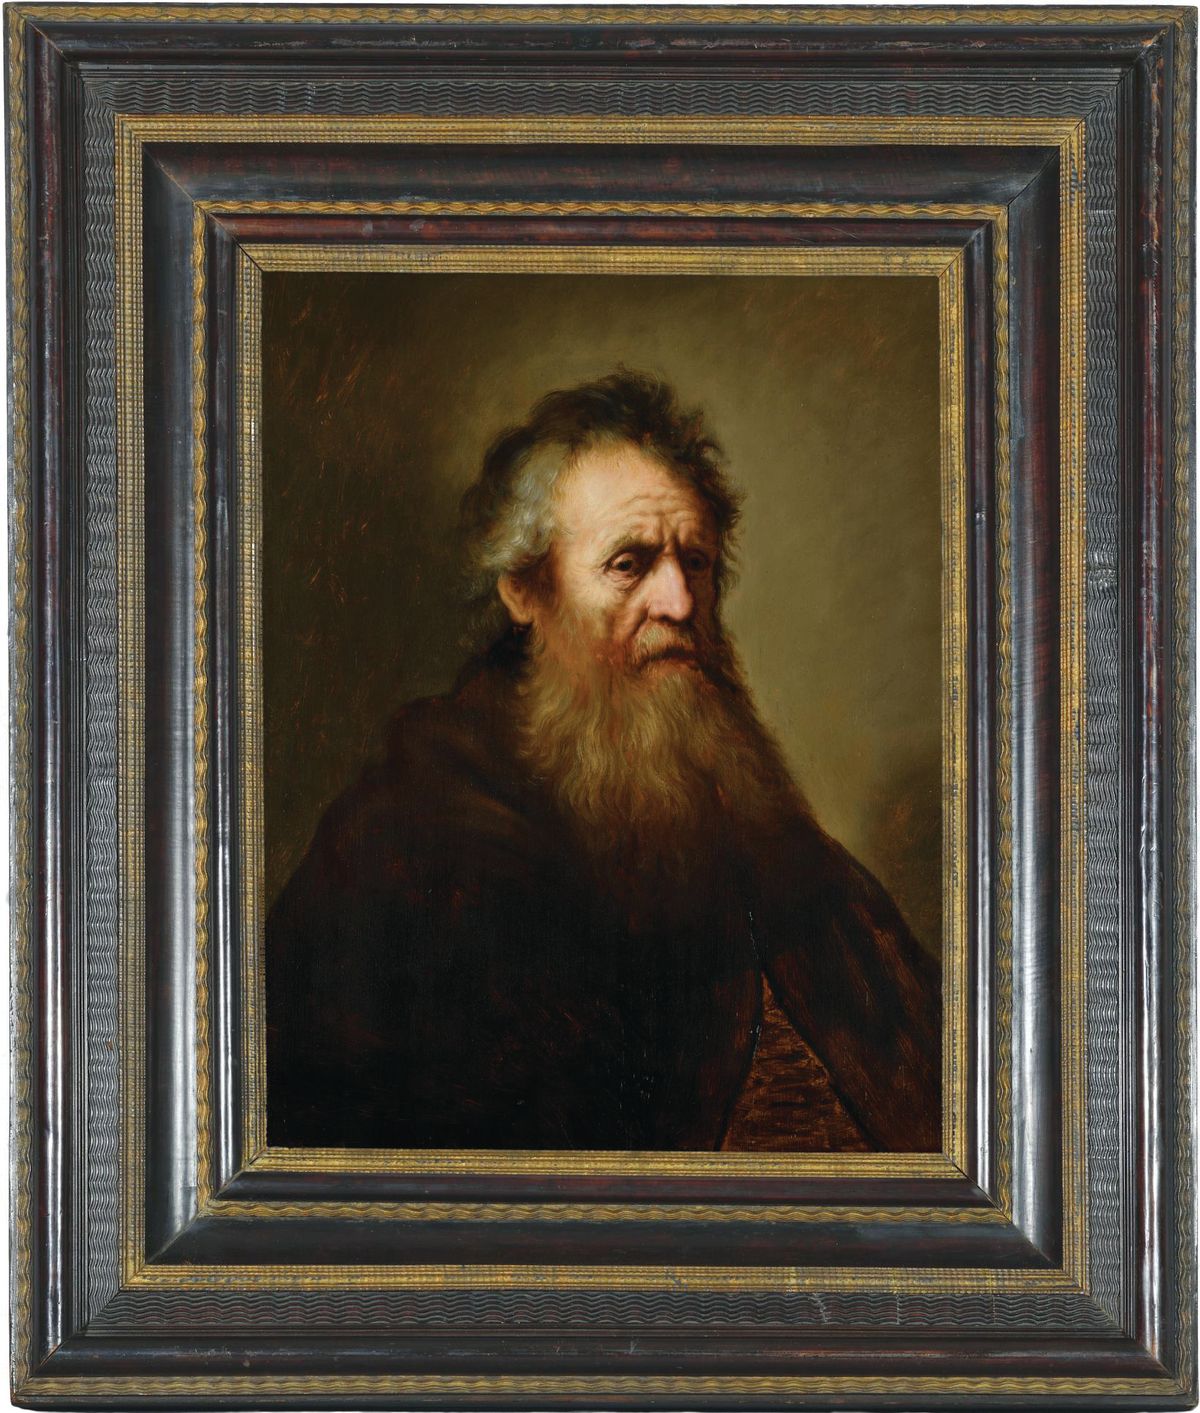 Curator Timo Trümper believes that Bol’s signature on the back of the work indicates ownership, rather than creation, of the work; the analysis also throws doubt on the attribution to Rembrandt of a similar work at Harvard Art Museums, which could be a studio copy. Photo: Lutz Ebhardt. 